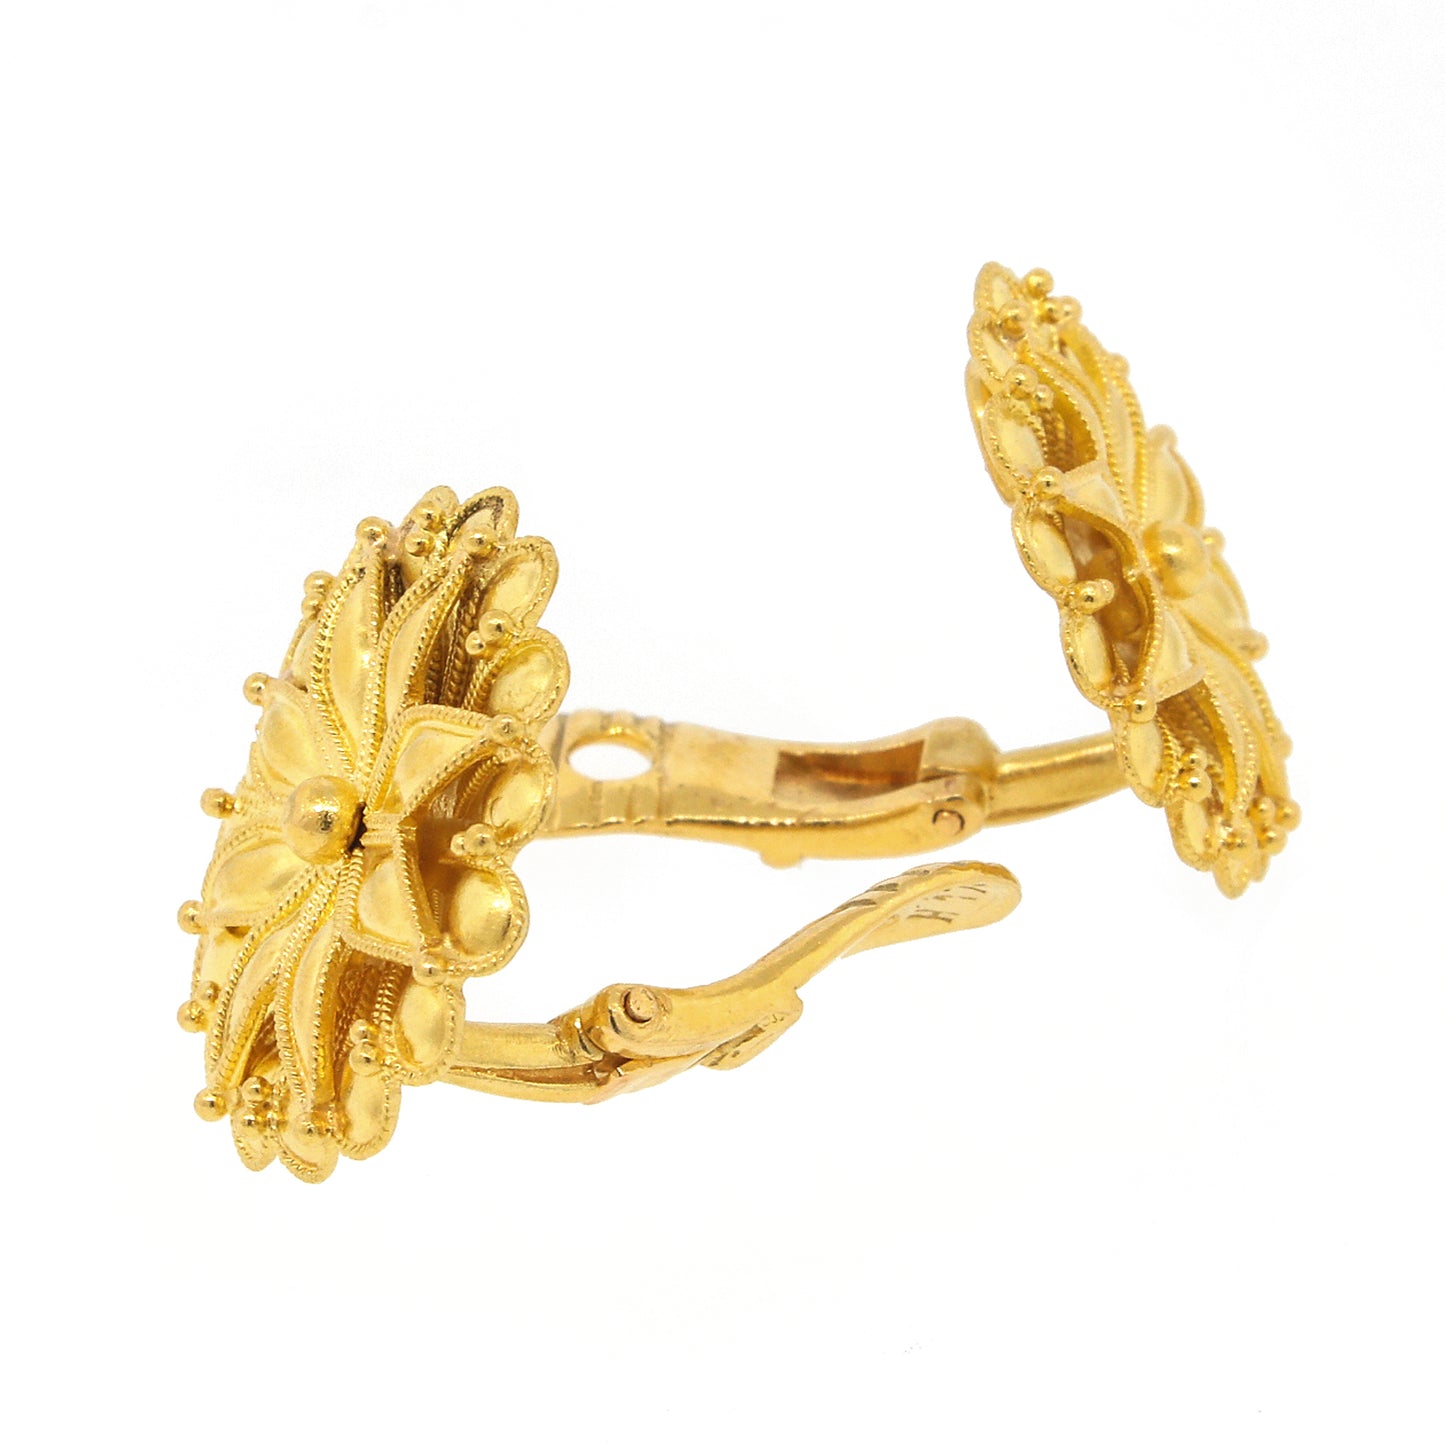 Zolotas Vintage Floral Yellow Gold Clip-on Earrings